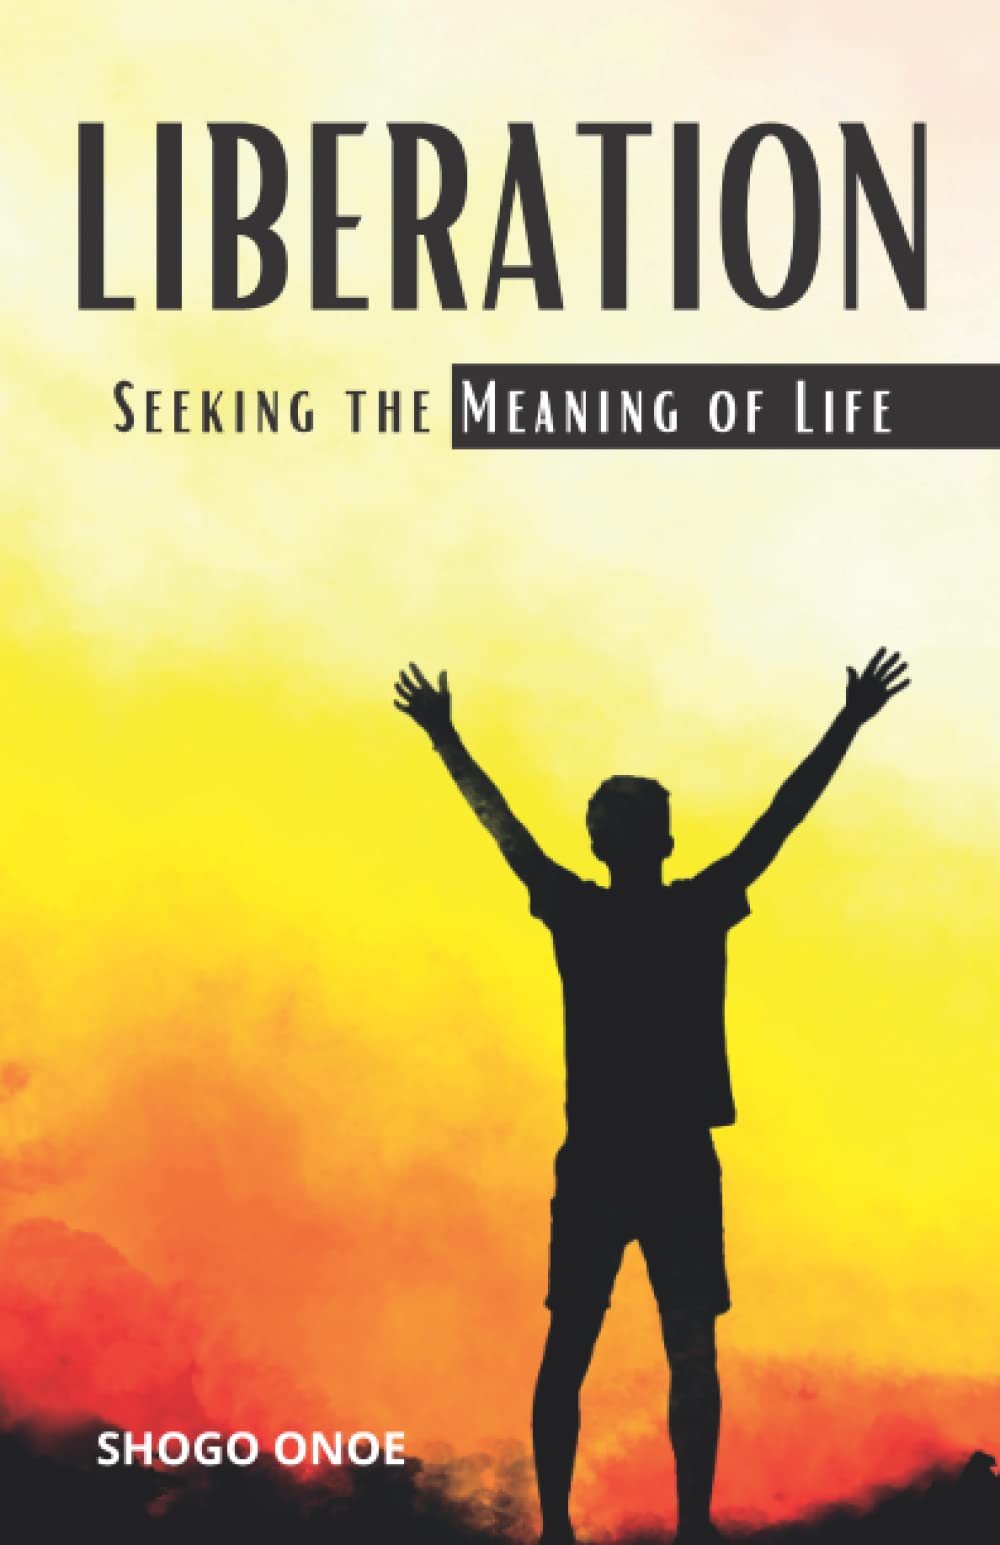 Author, Shogo Onoe Releases New Book "Liberation: Seeking the Meaning of Life" to Rave Reviews